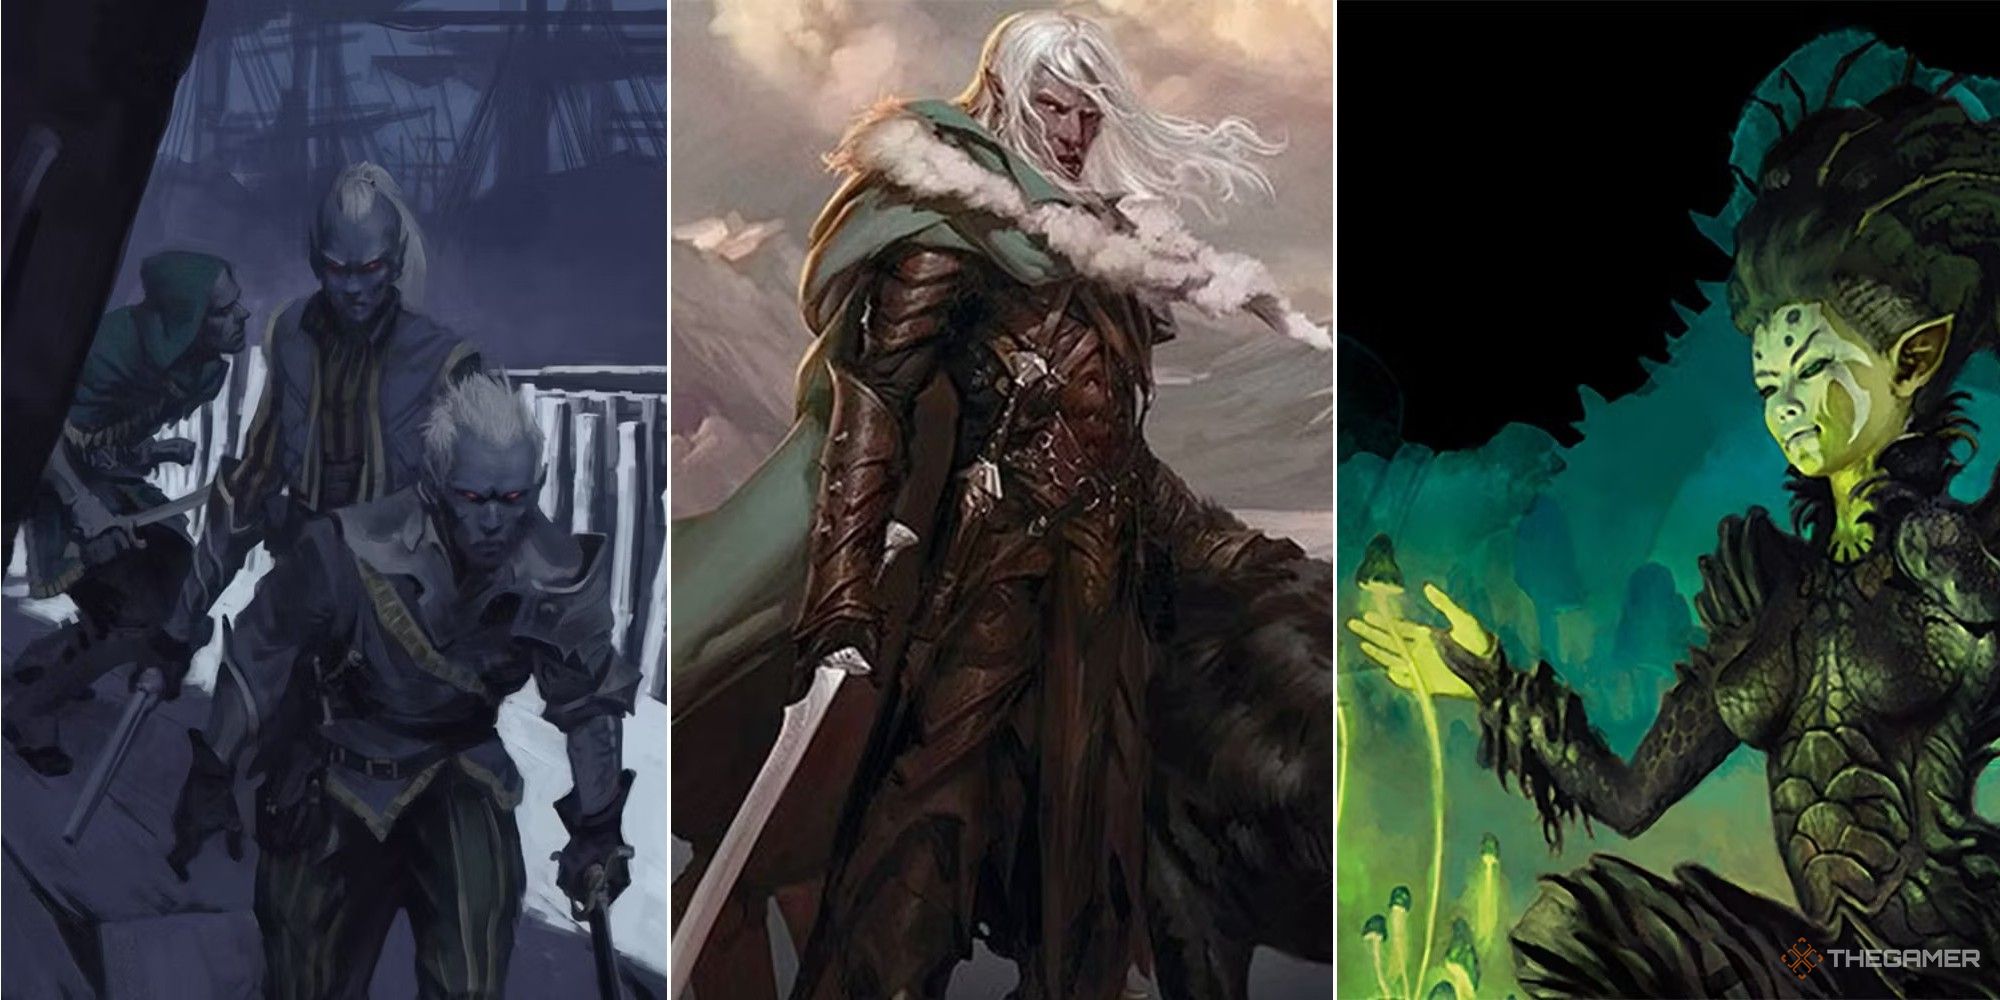 Dungeons & Dragons collage showing three drow rogues, famous hero drizzt, and an adventurer in the underdark